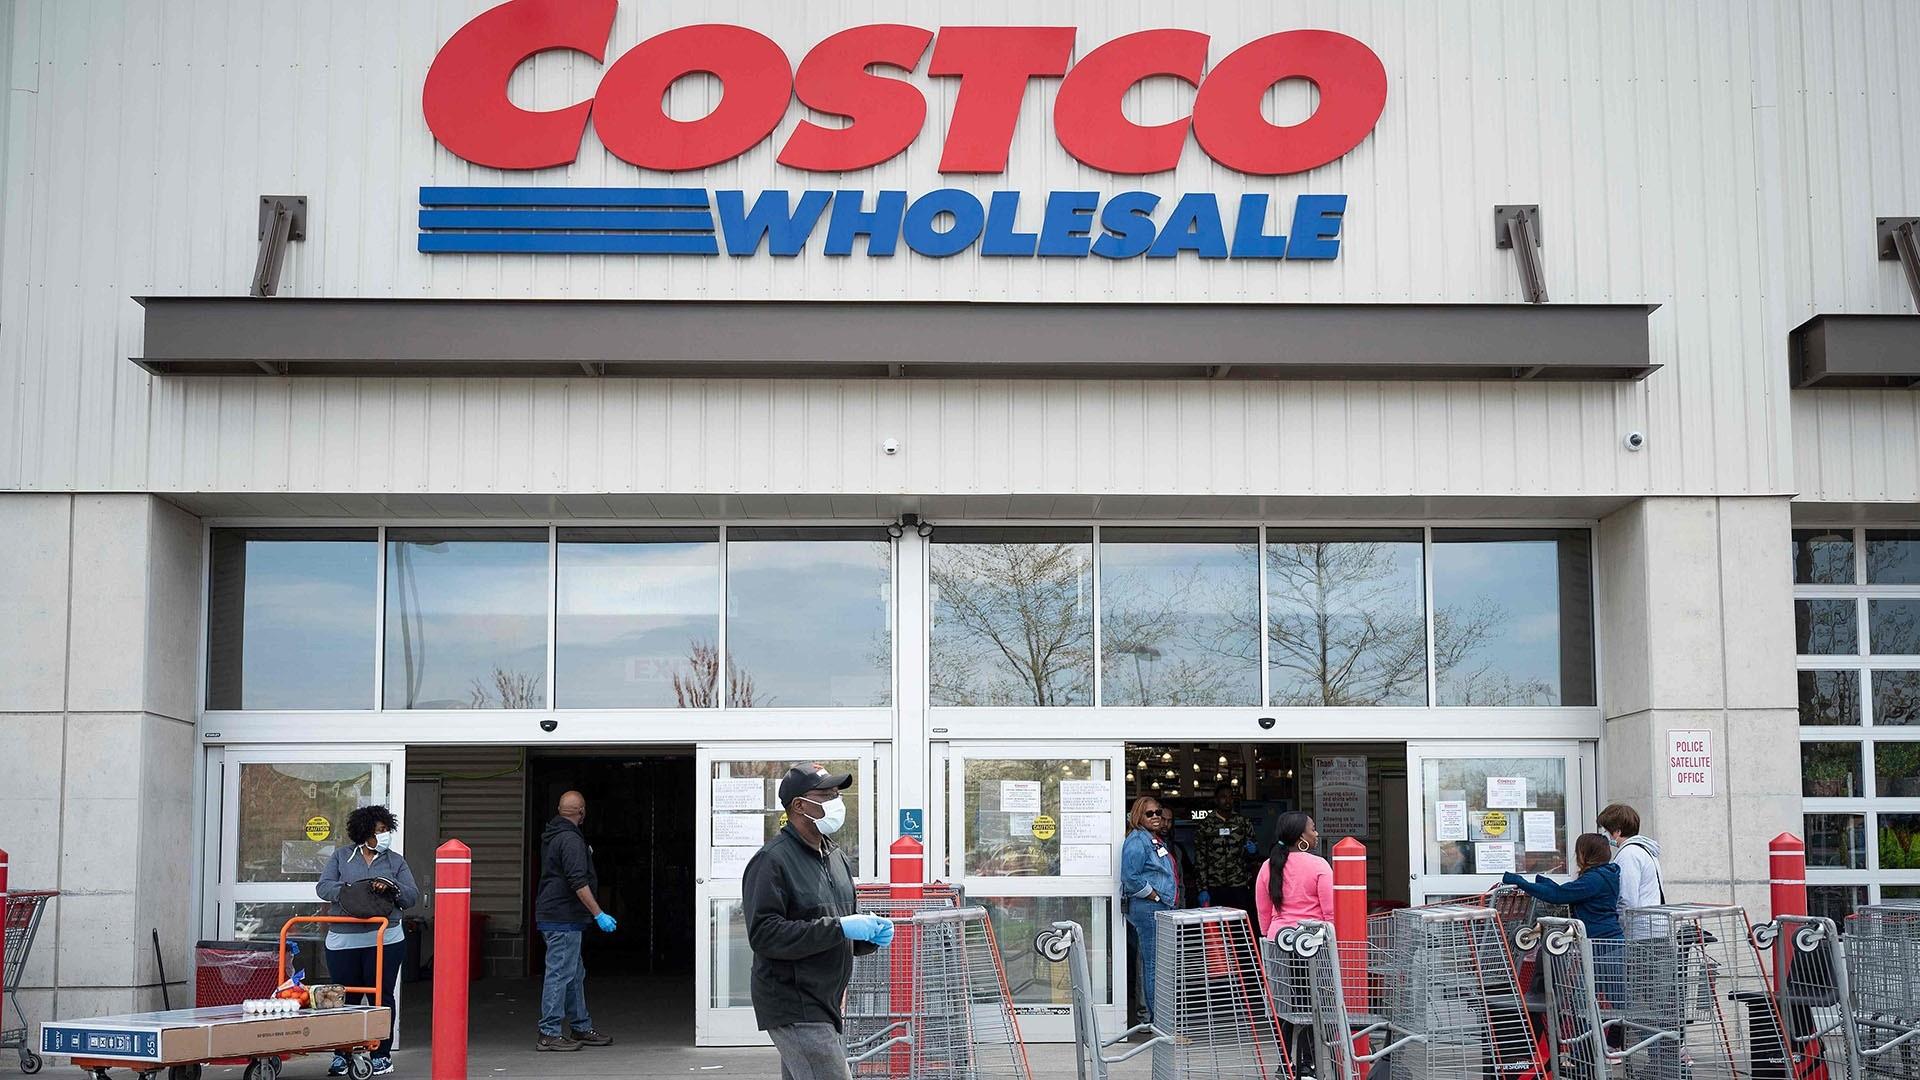 Costco will give priority access to health care workers